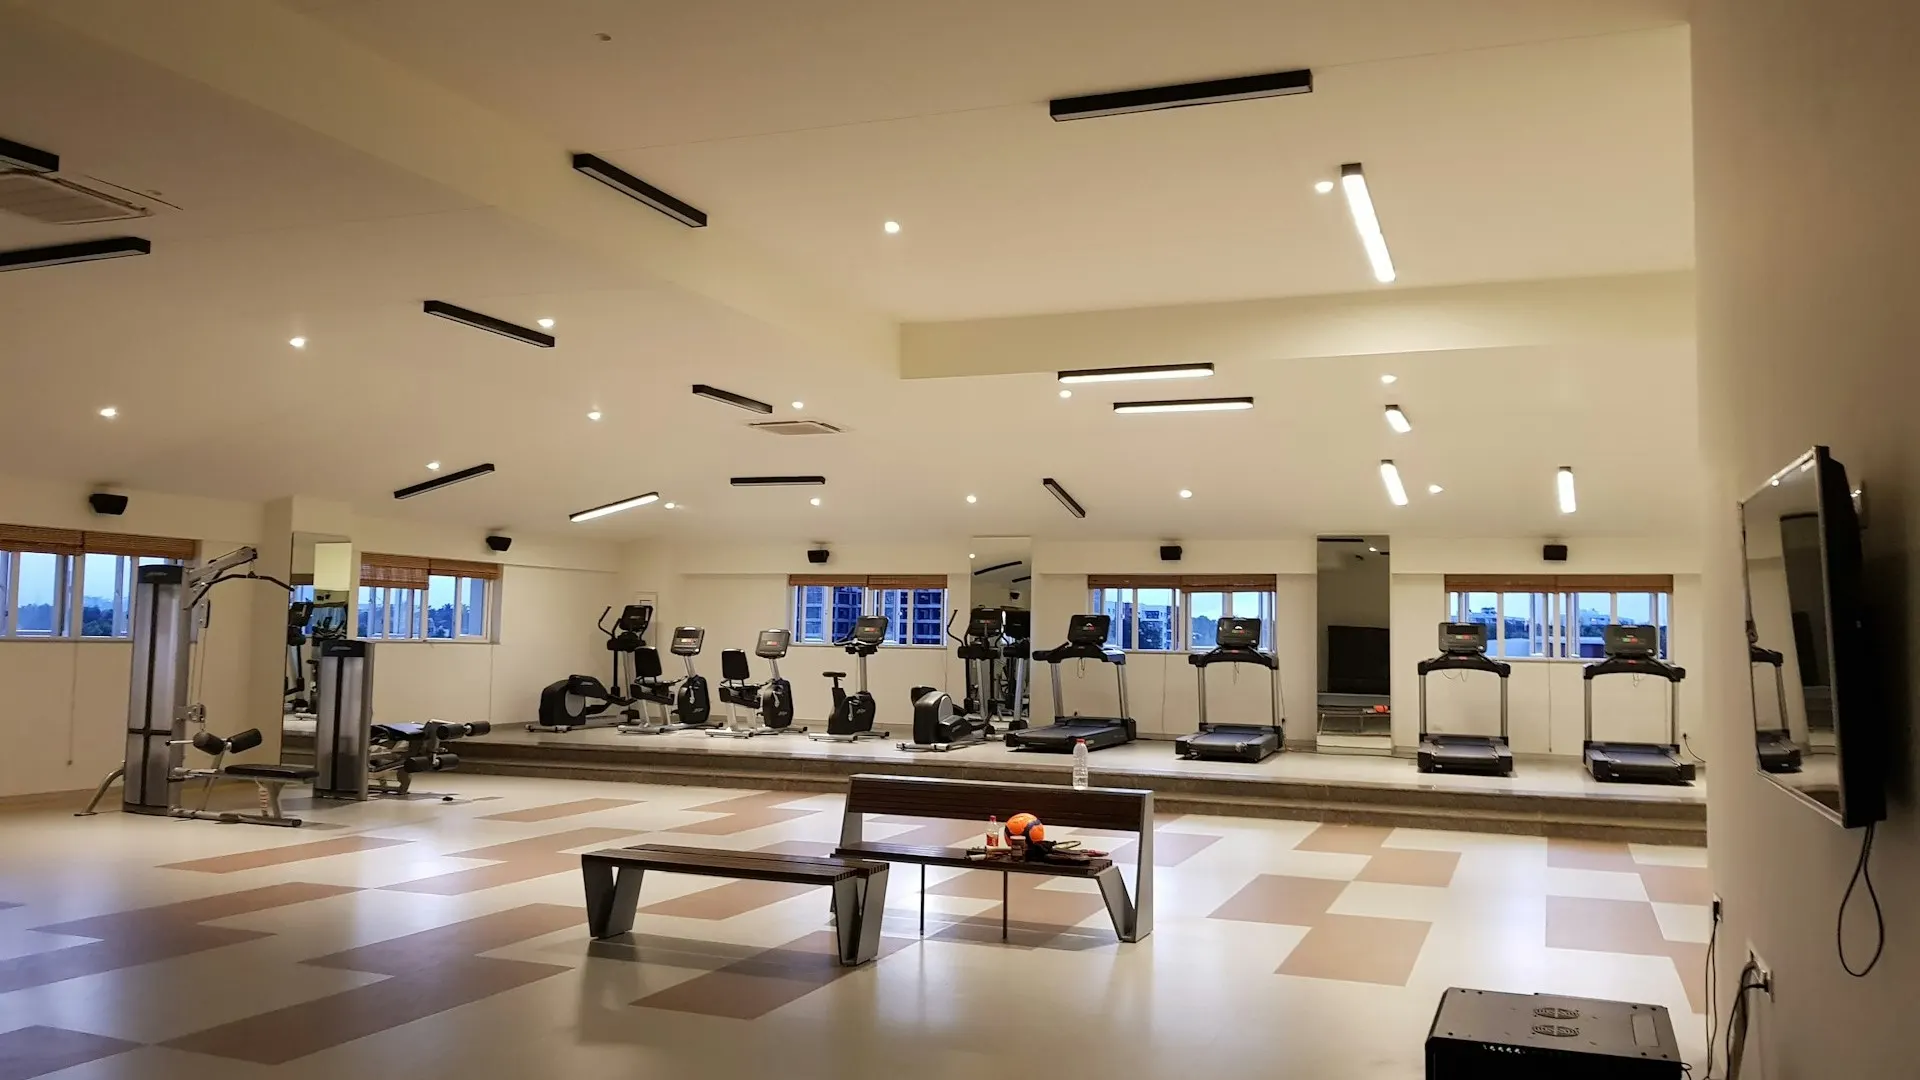 The gymnasium at L&T Island Cove featuring a variety of fitness equipment, bright lighting, and a spacious interior for a comprehensive workout experience.